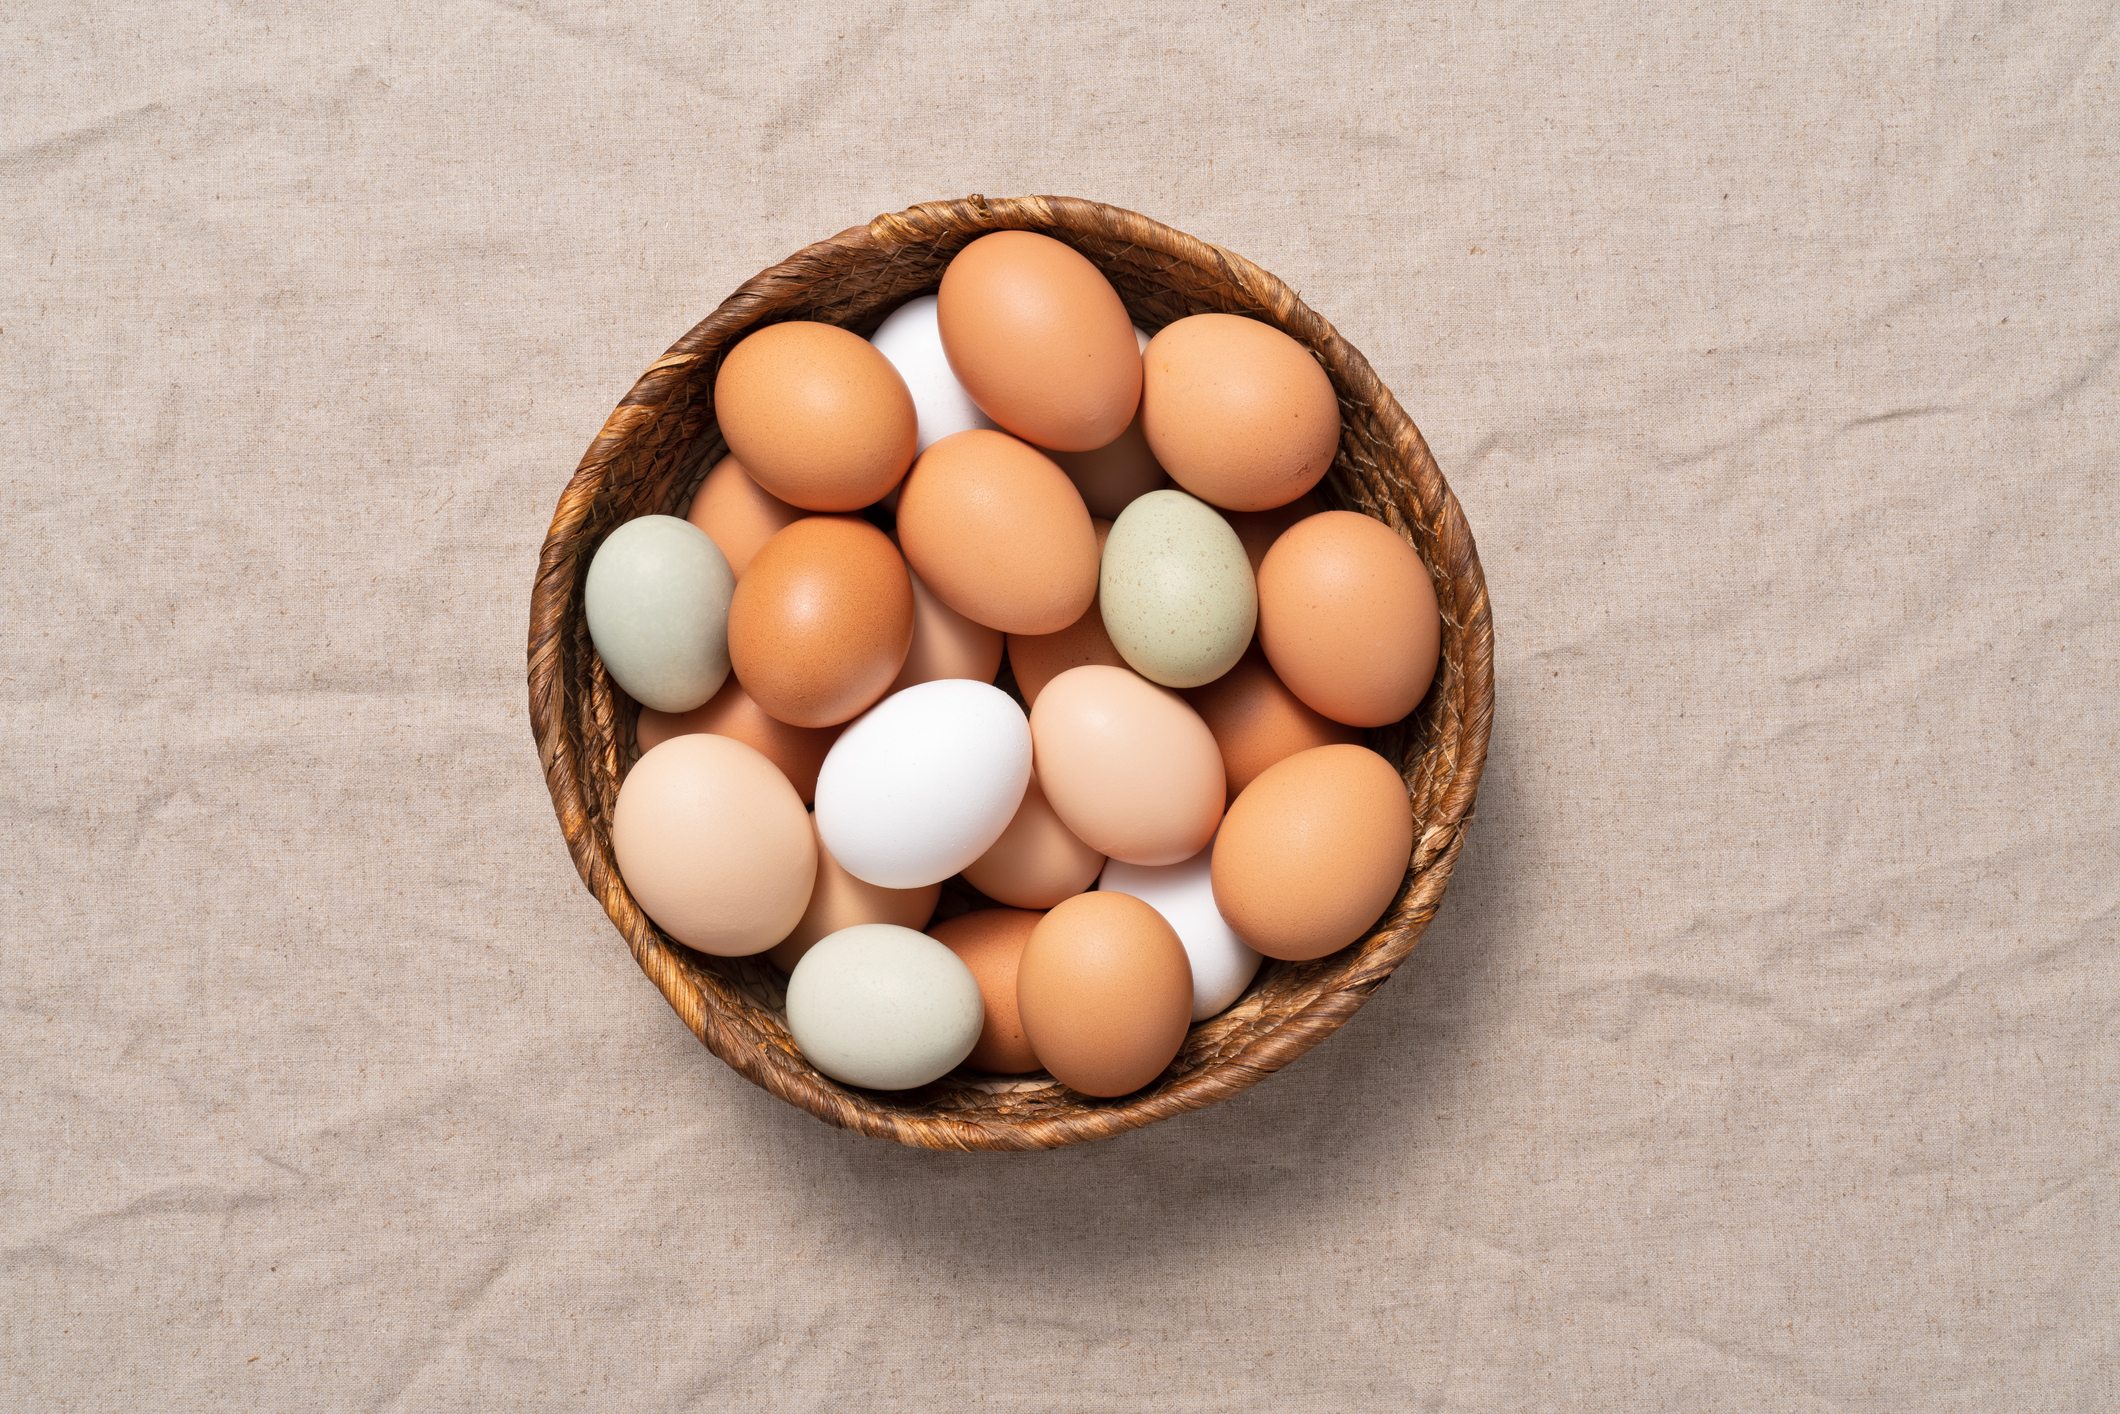 Multicolored chicken eggs in a basket on a beige linen tablecloth.